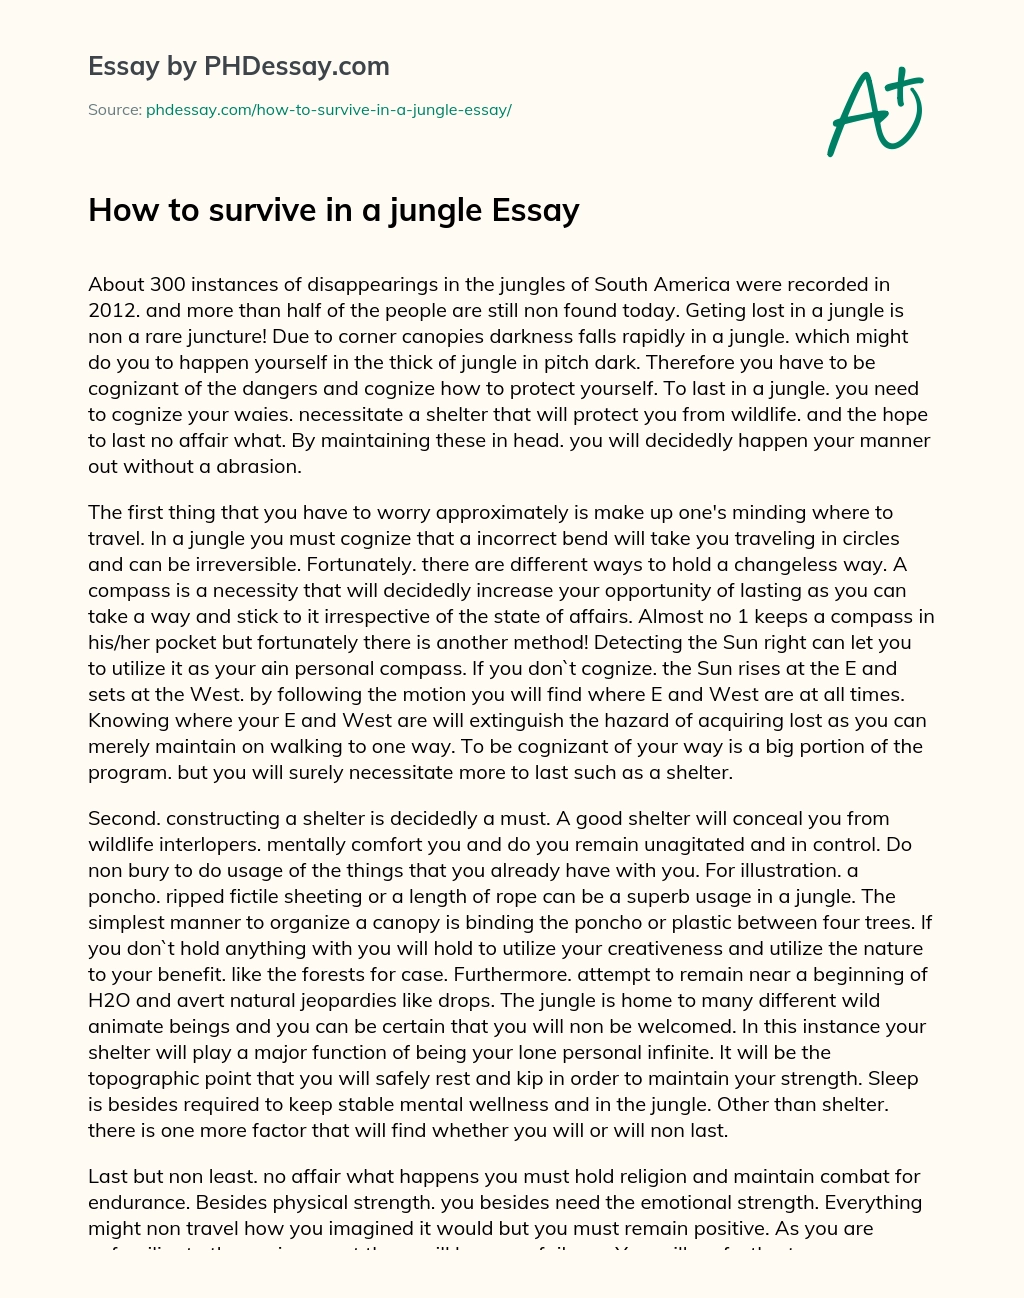 How to survive in a jungle Essay essay